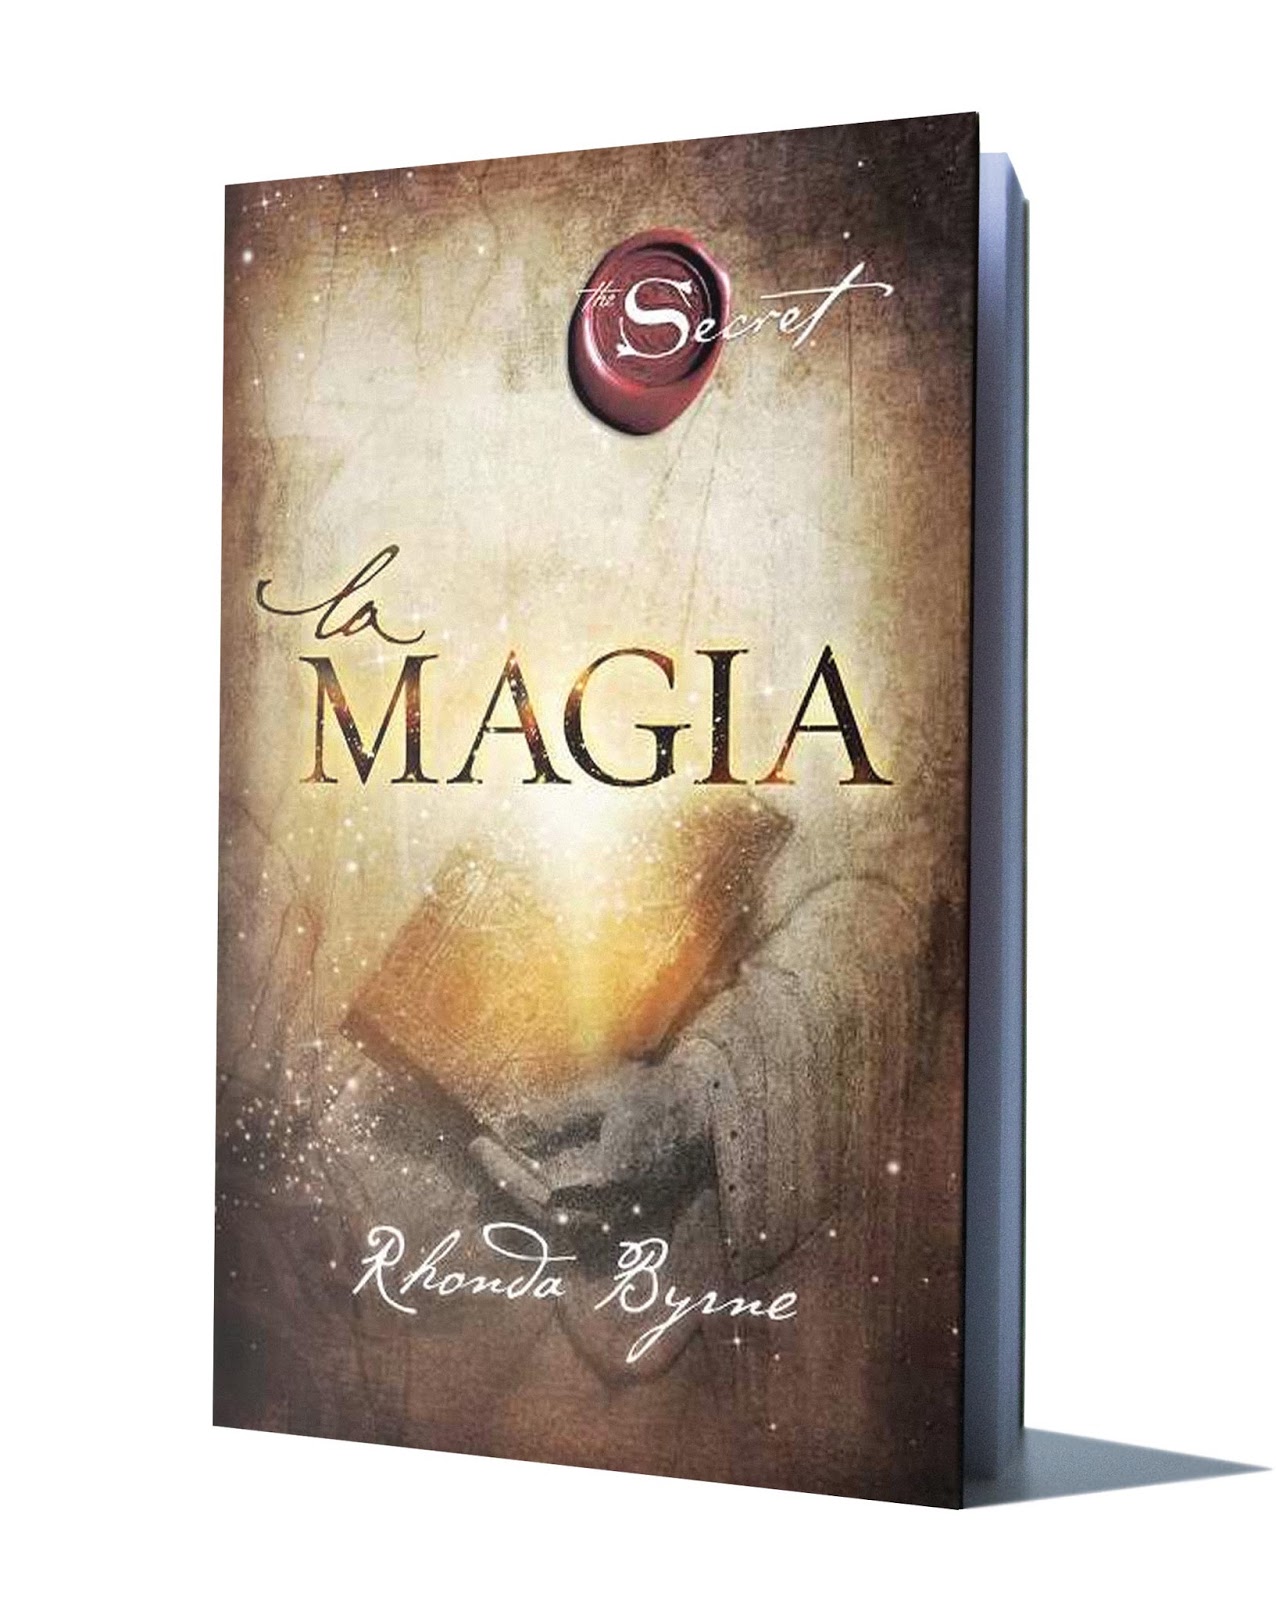 Rhonda byrne the law of attraction